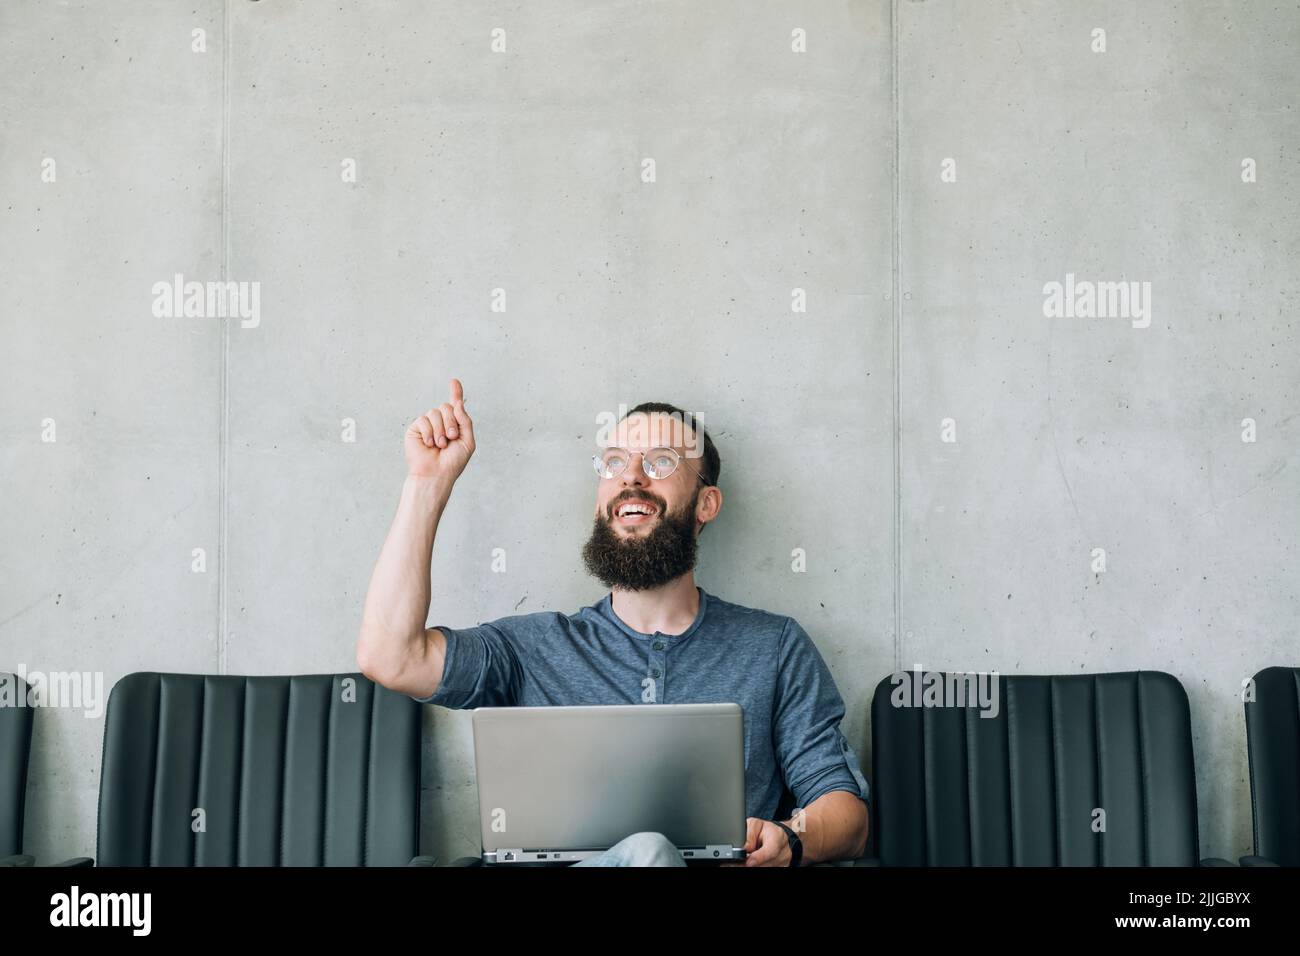 amazed smiling man point up office business employ Stock Photo